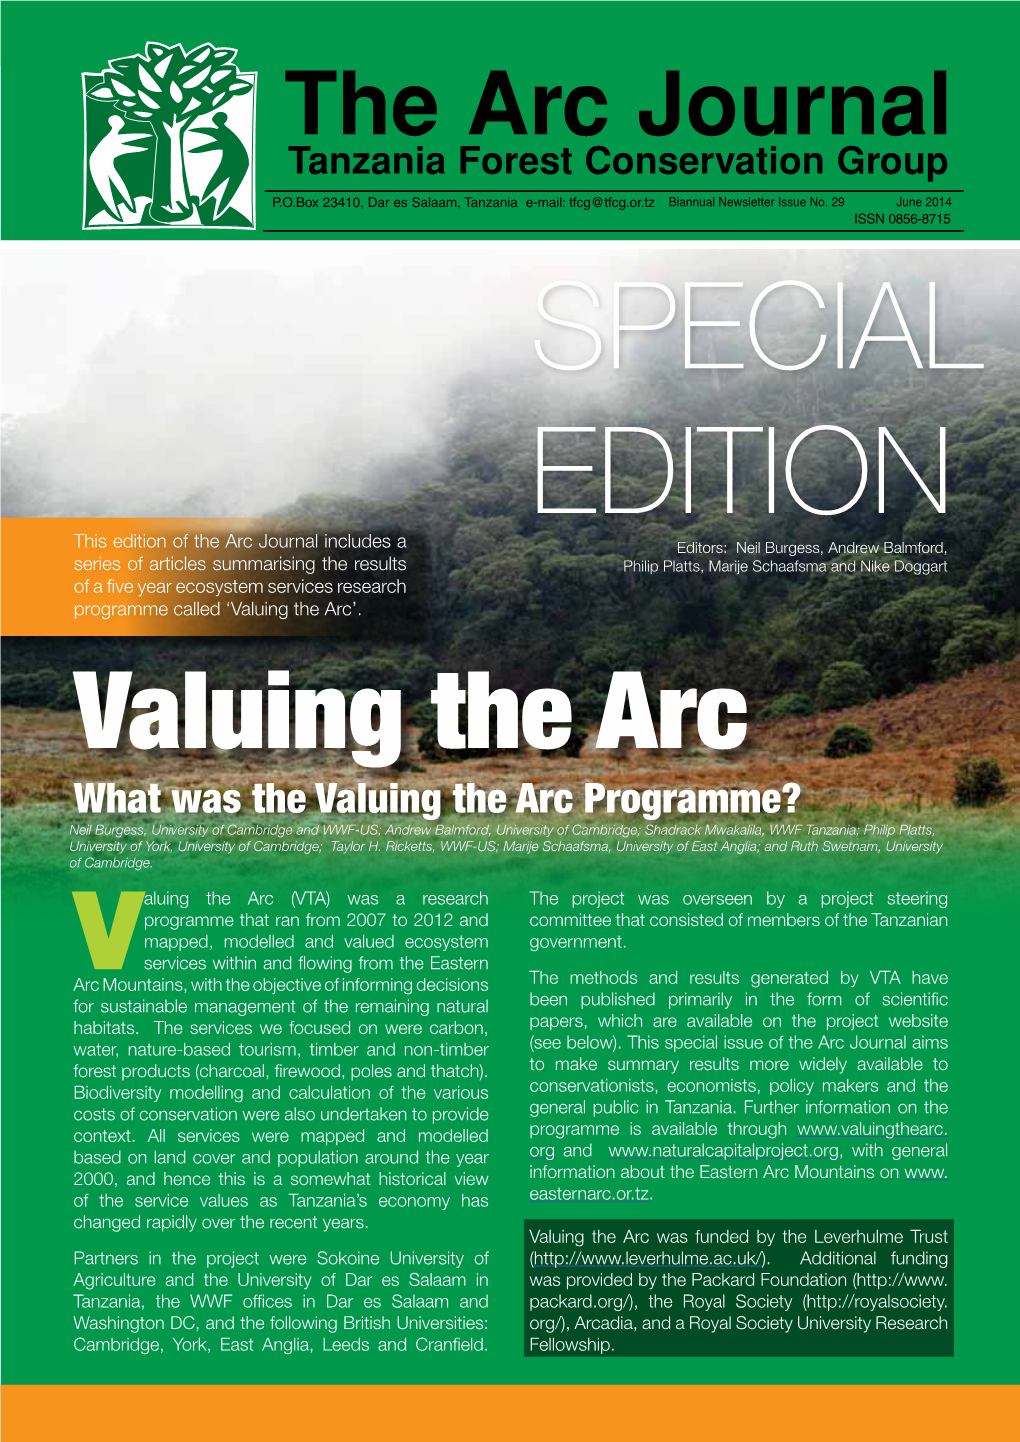 Valuing the Arc’